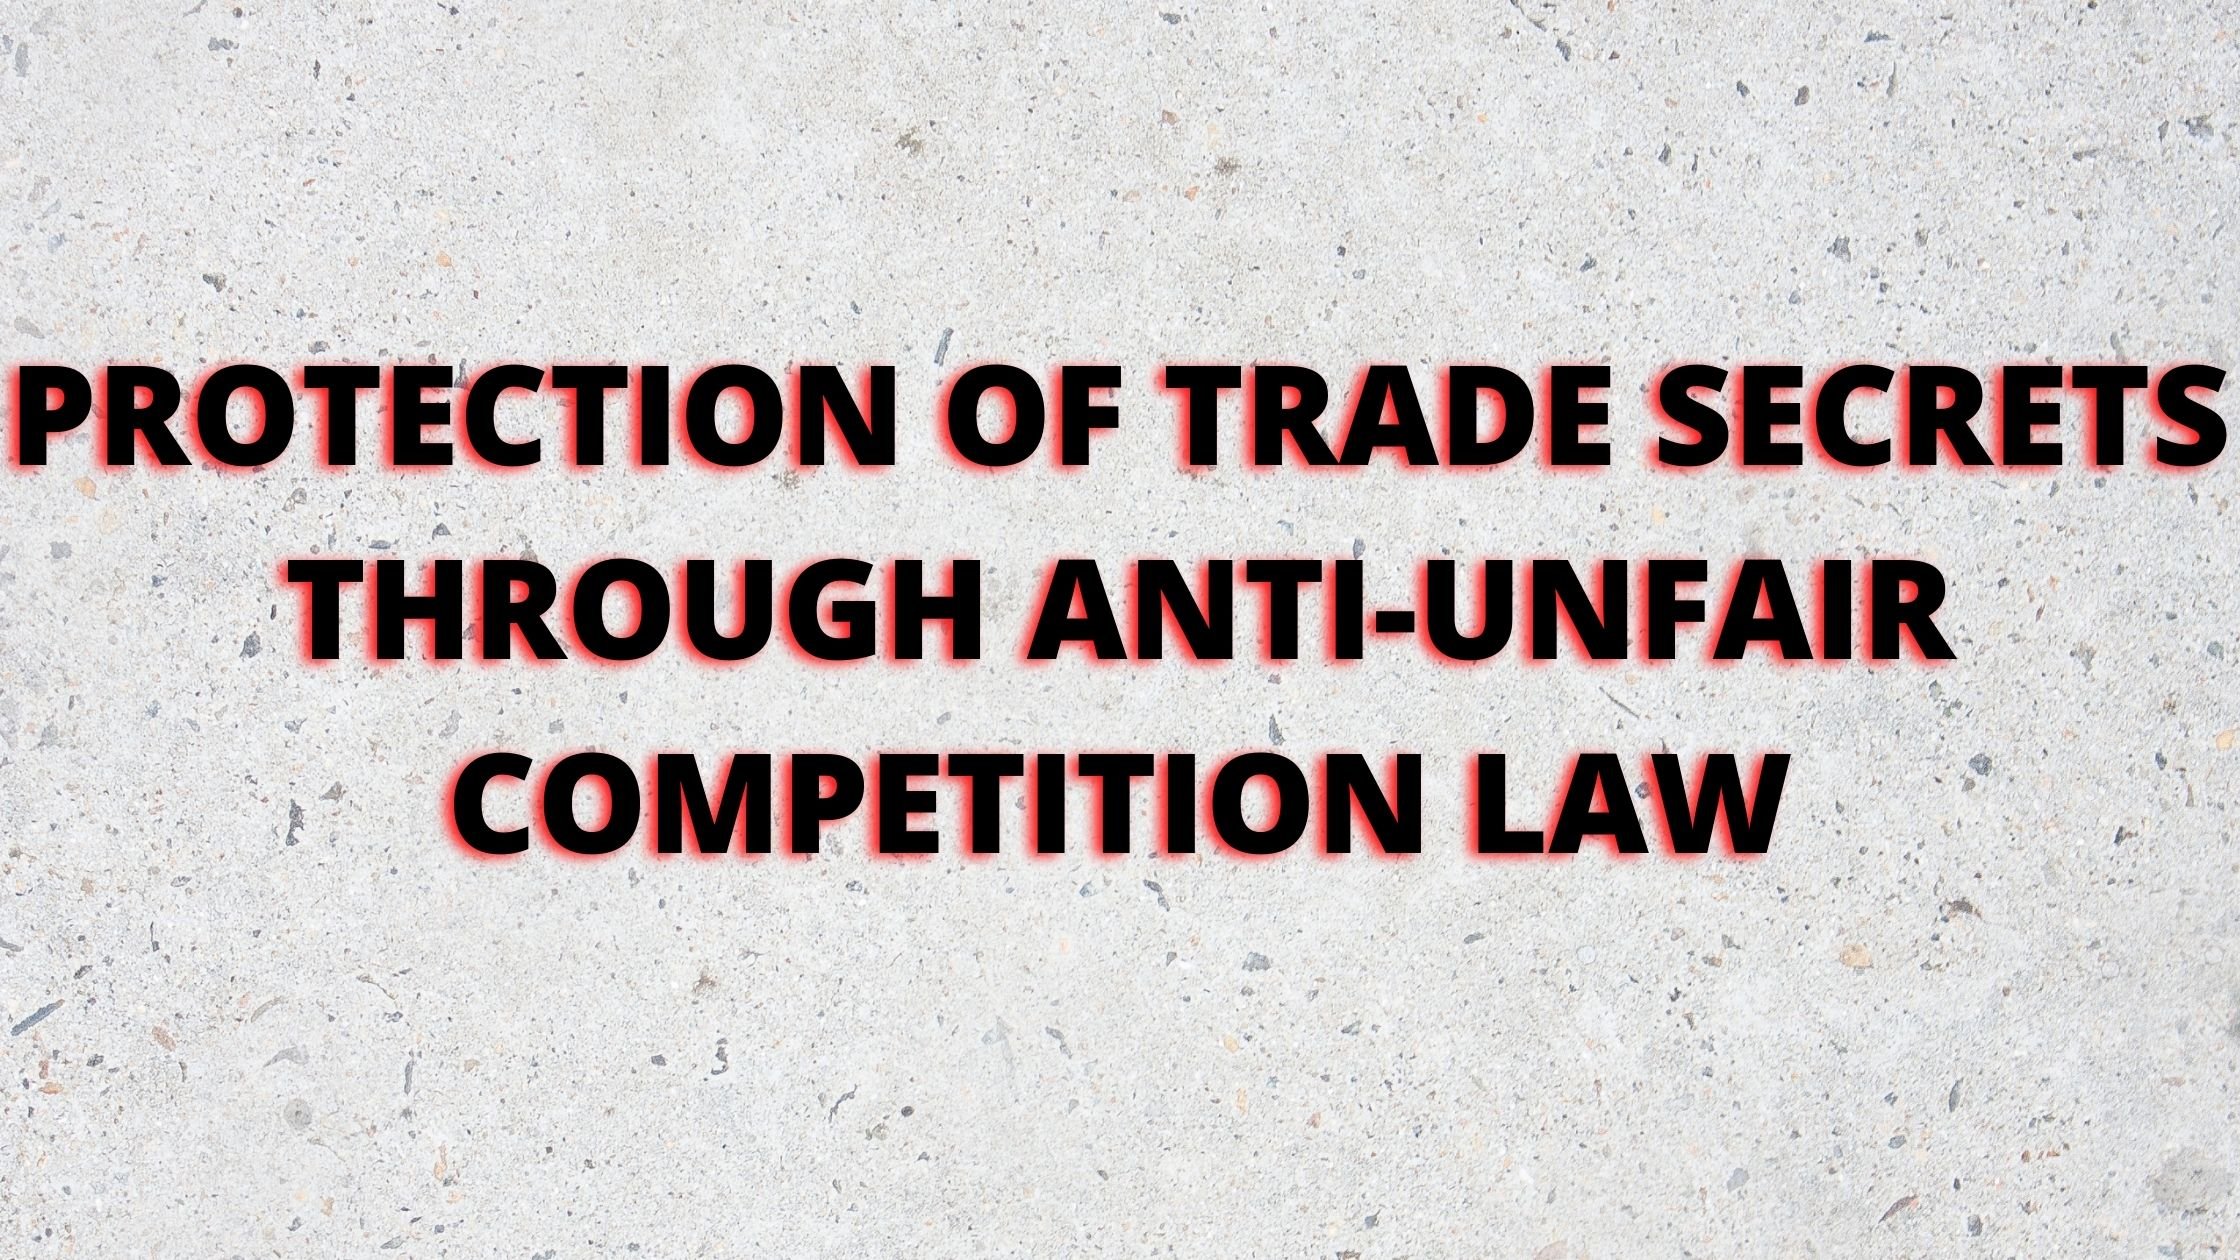 PROTECTION OF TRADE SECRETS THROUGH ANTI-UNFAIR COMPETITION LAW